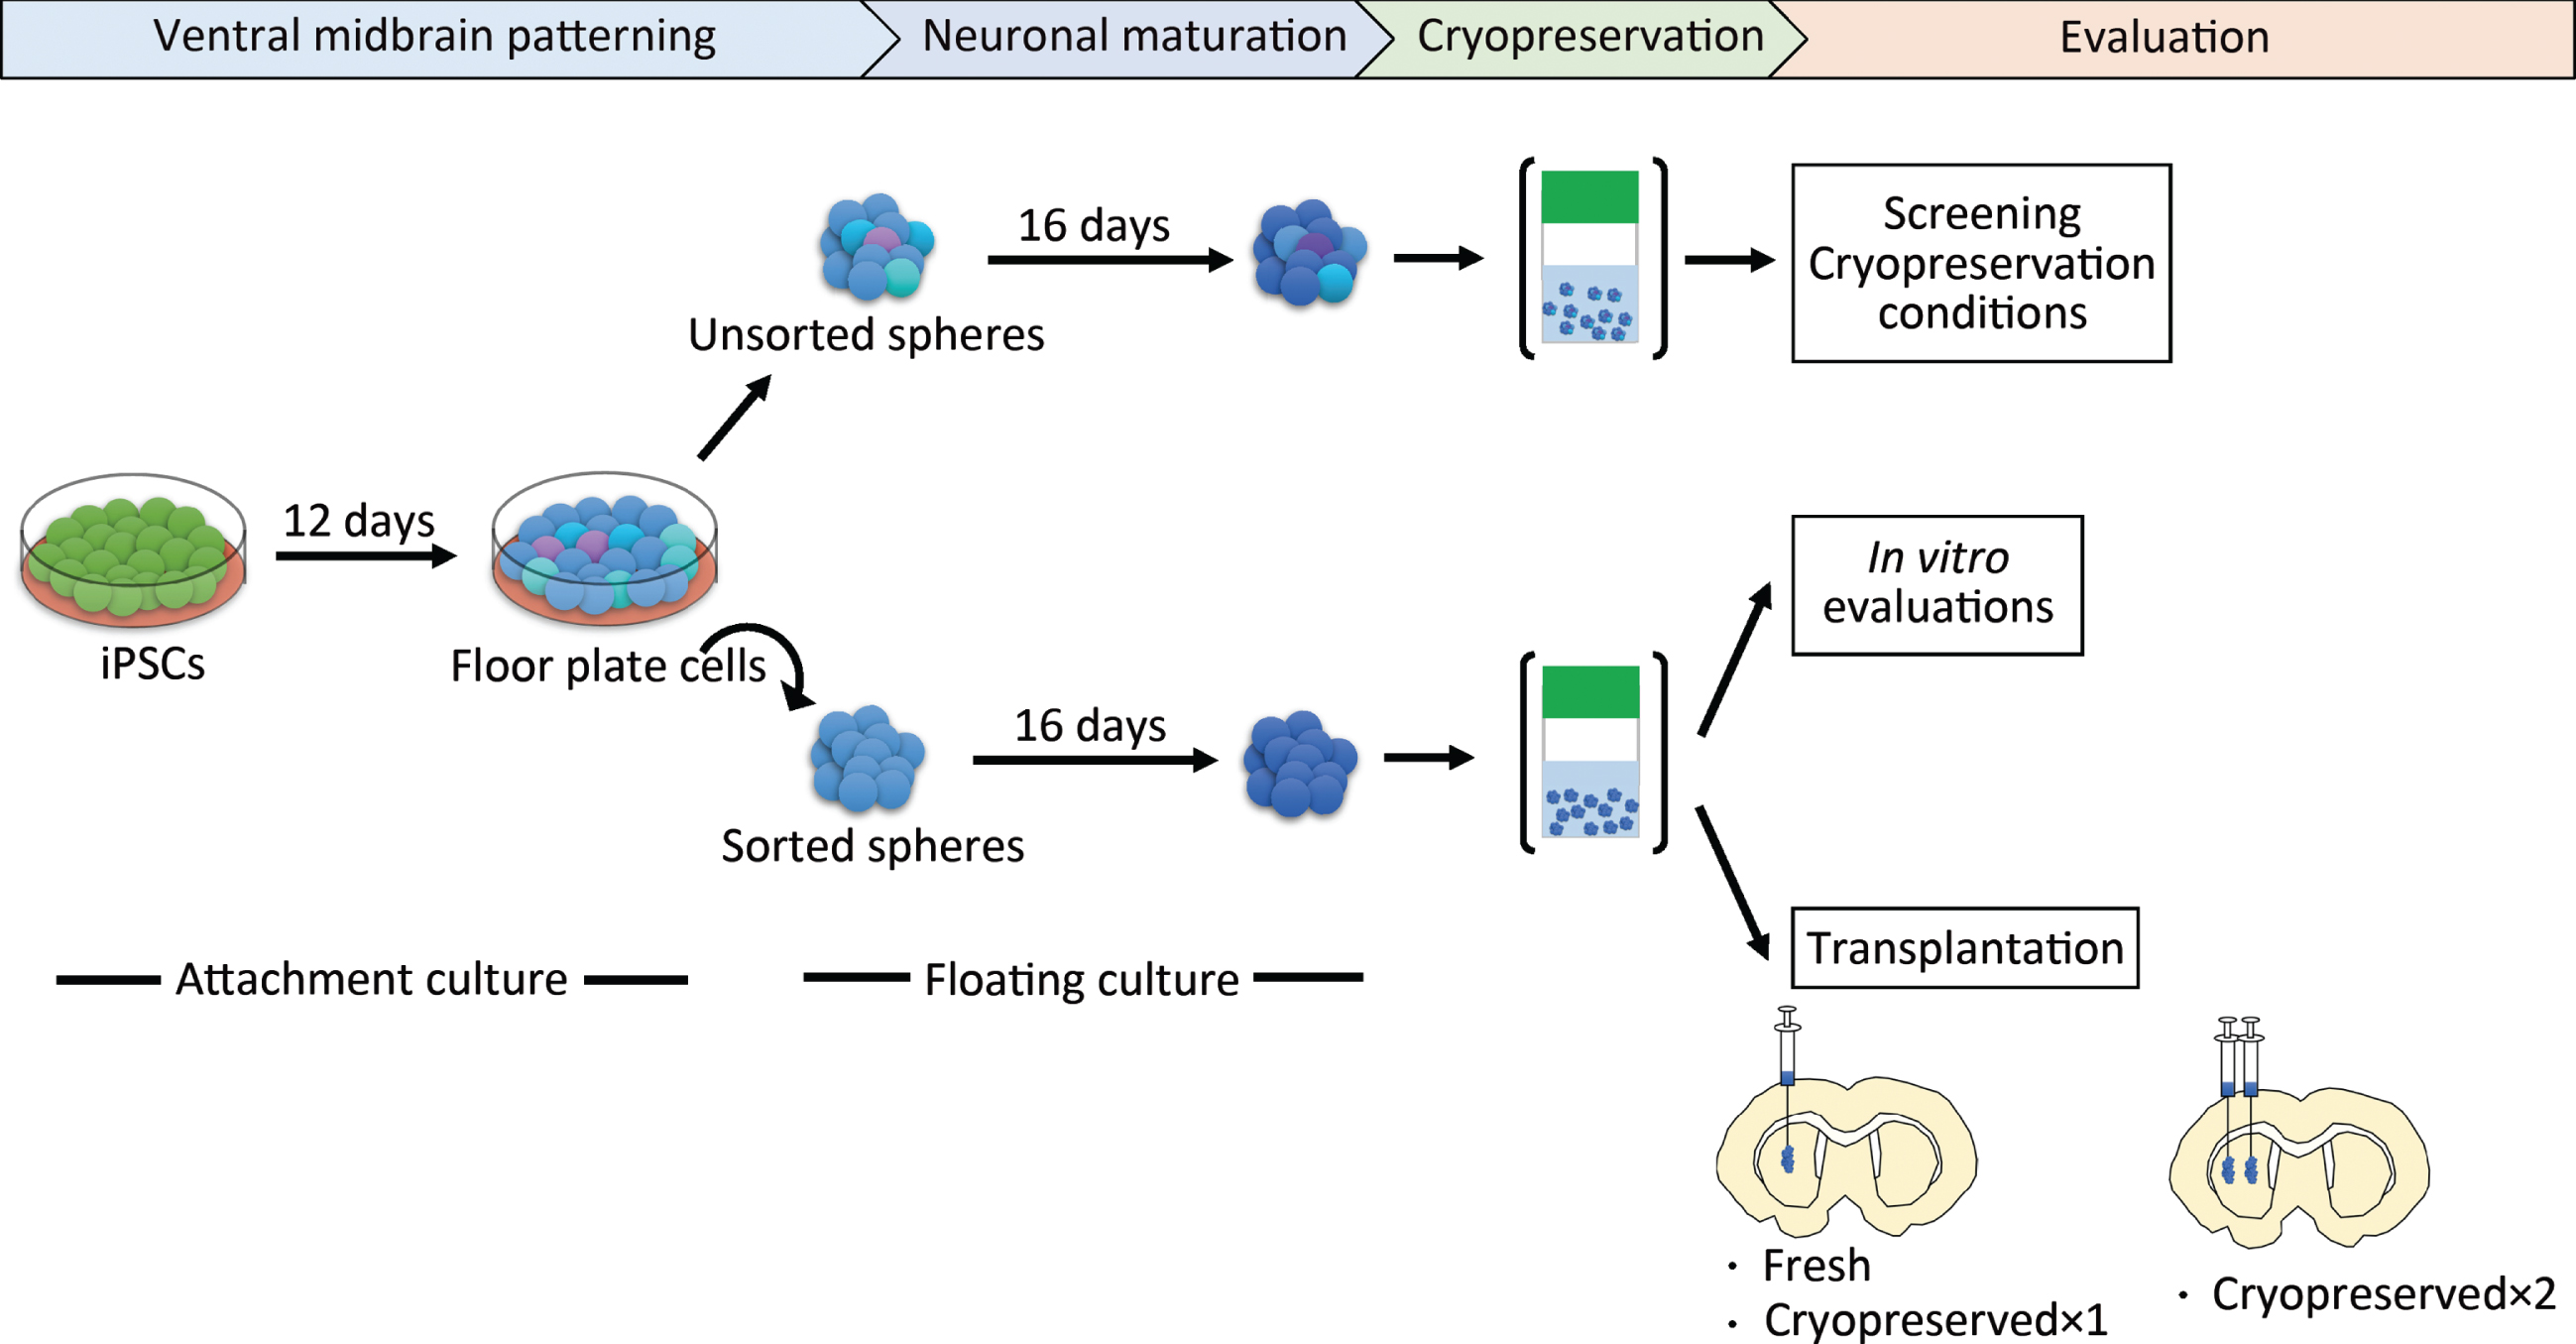 Schematic overview of the protocol steps. Cryopreserved×1 and Cryopreserved×2 are defined in the main text. iPSCs, induced pluripotent stem cells.